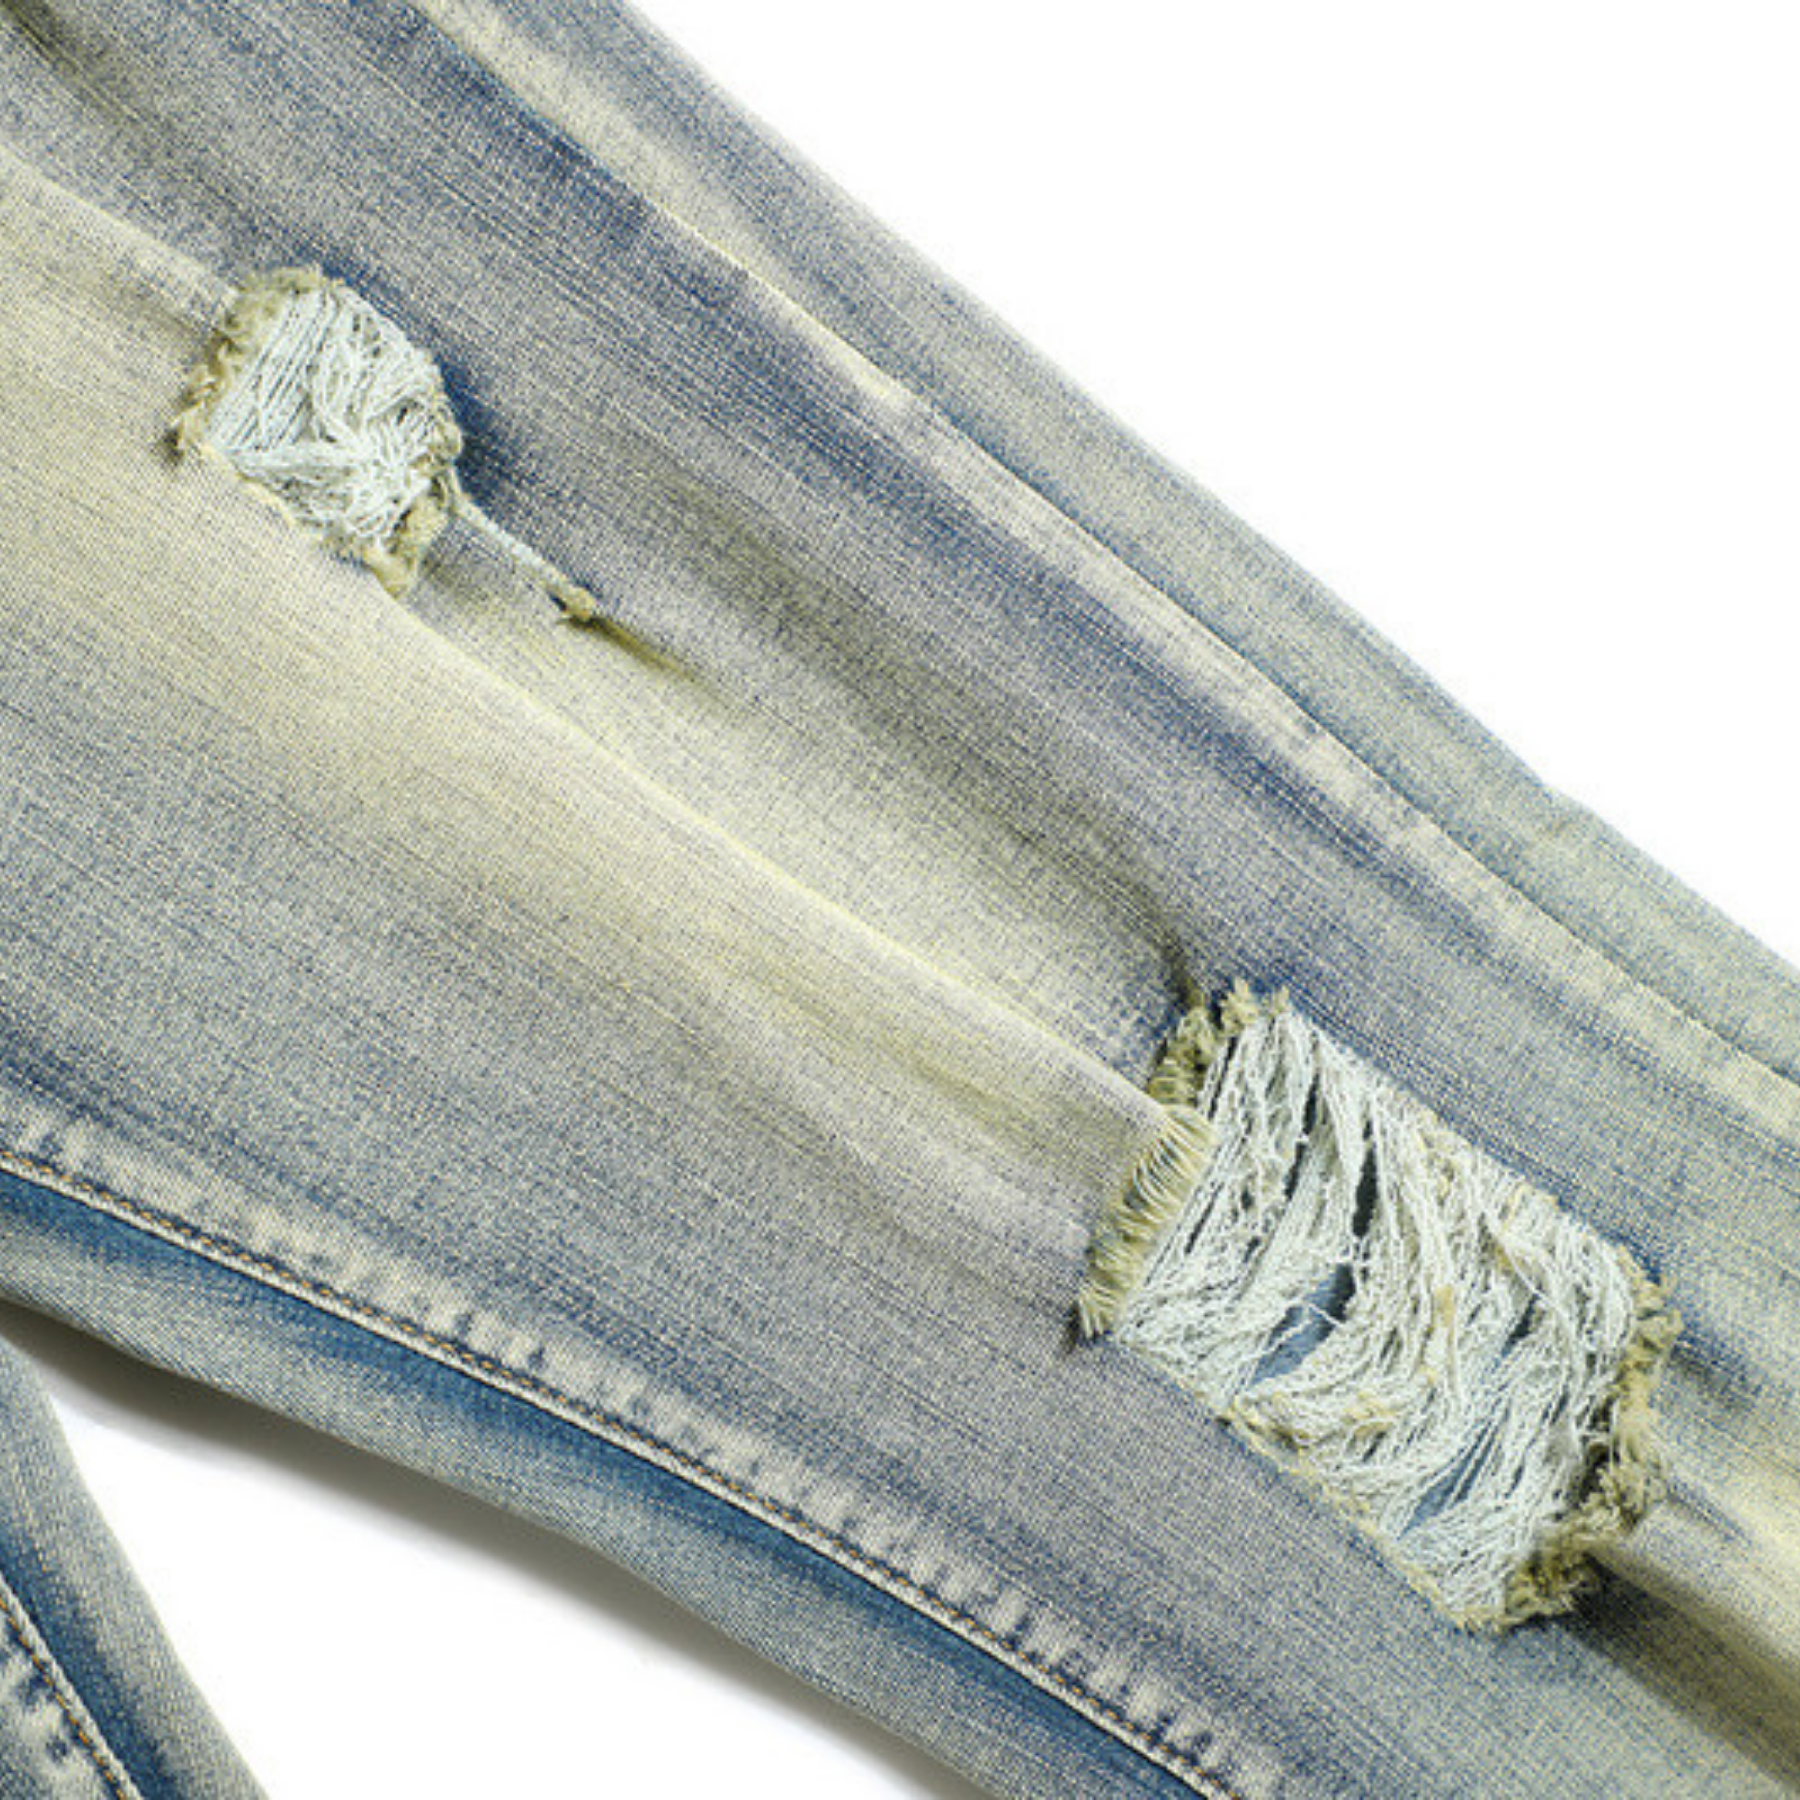 FASHION JEANS | RIPPED JEANS